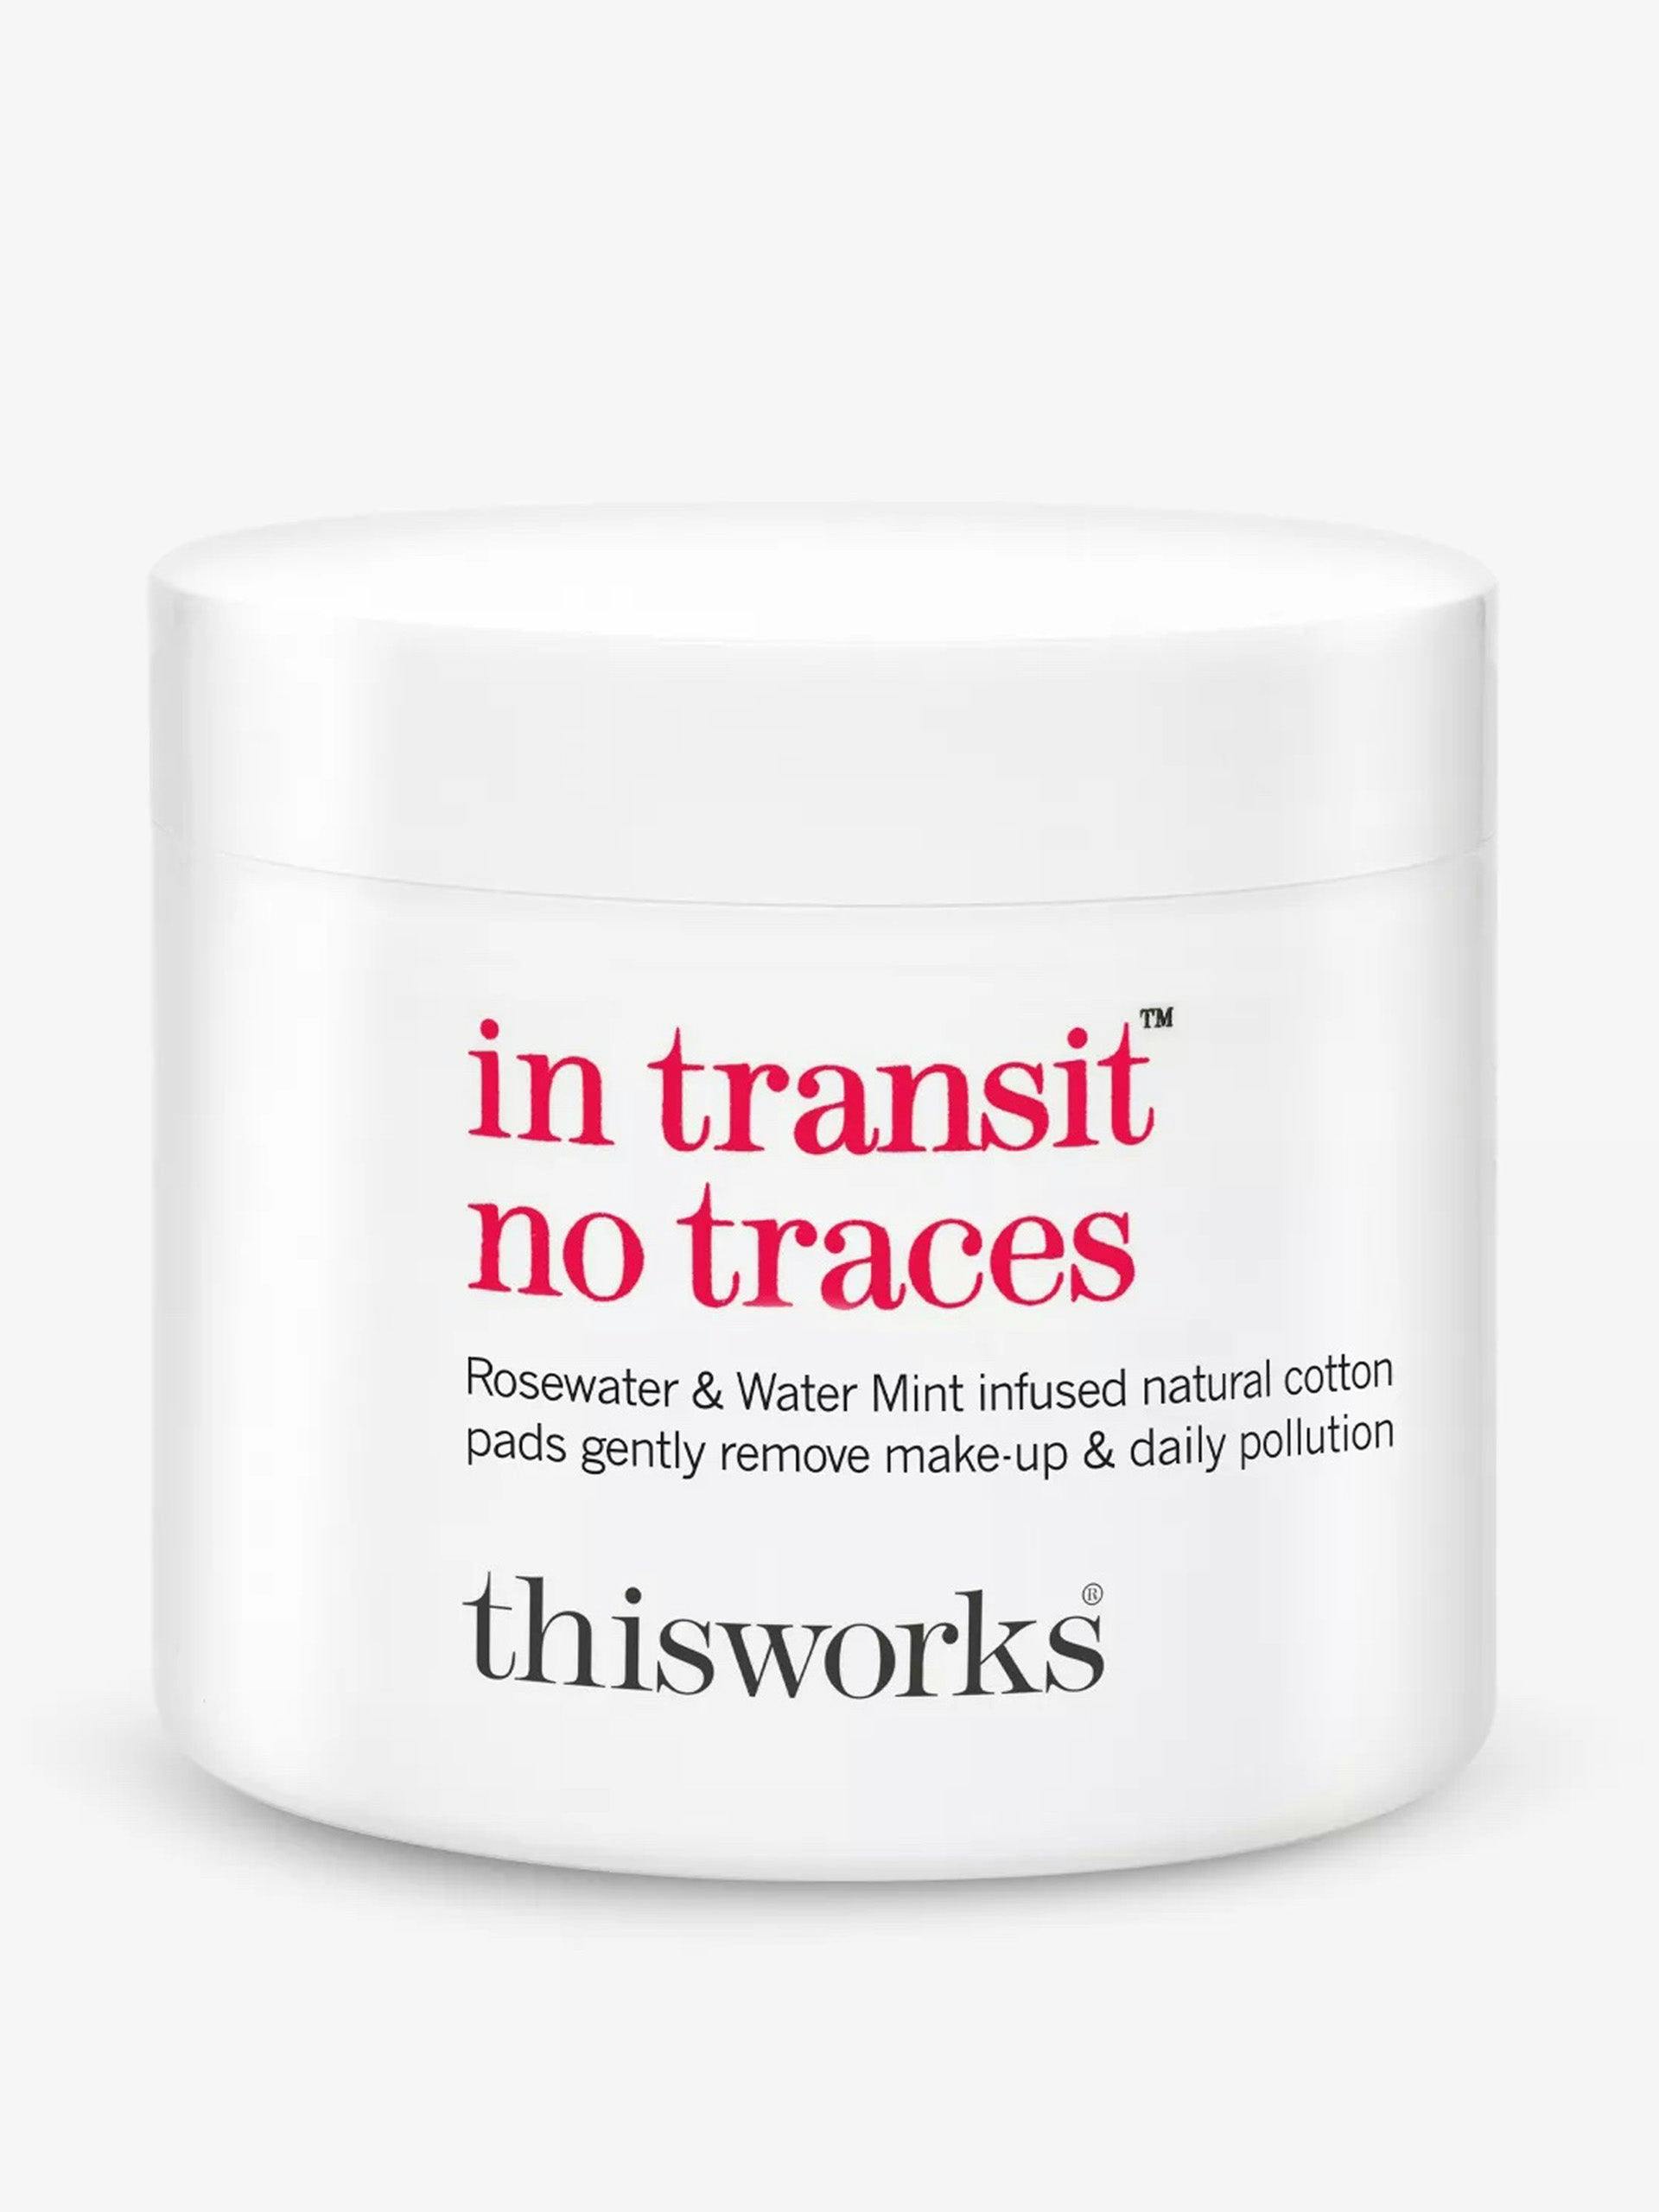 In Transit No Traces pack of 60 pads